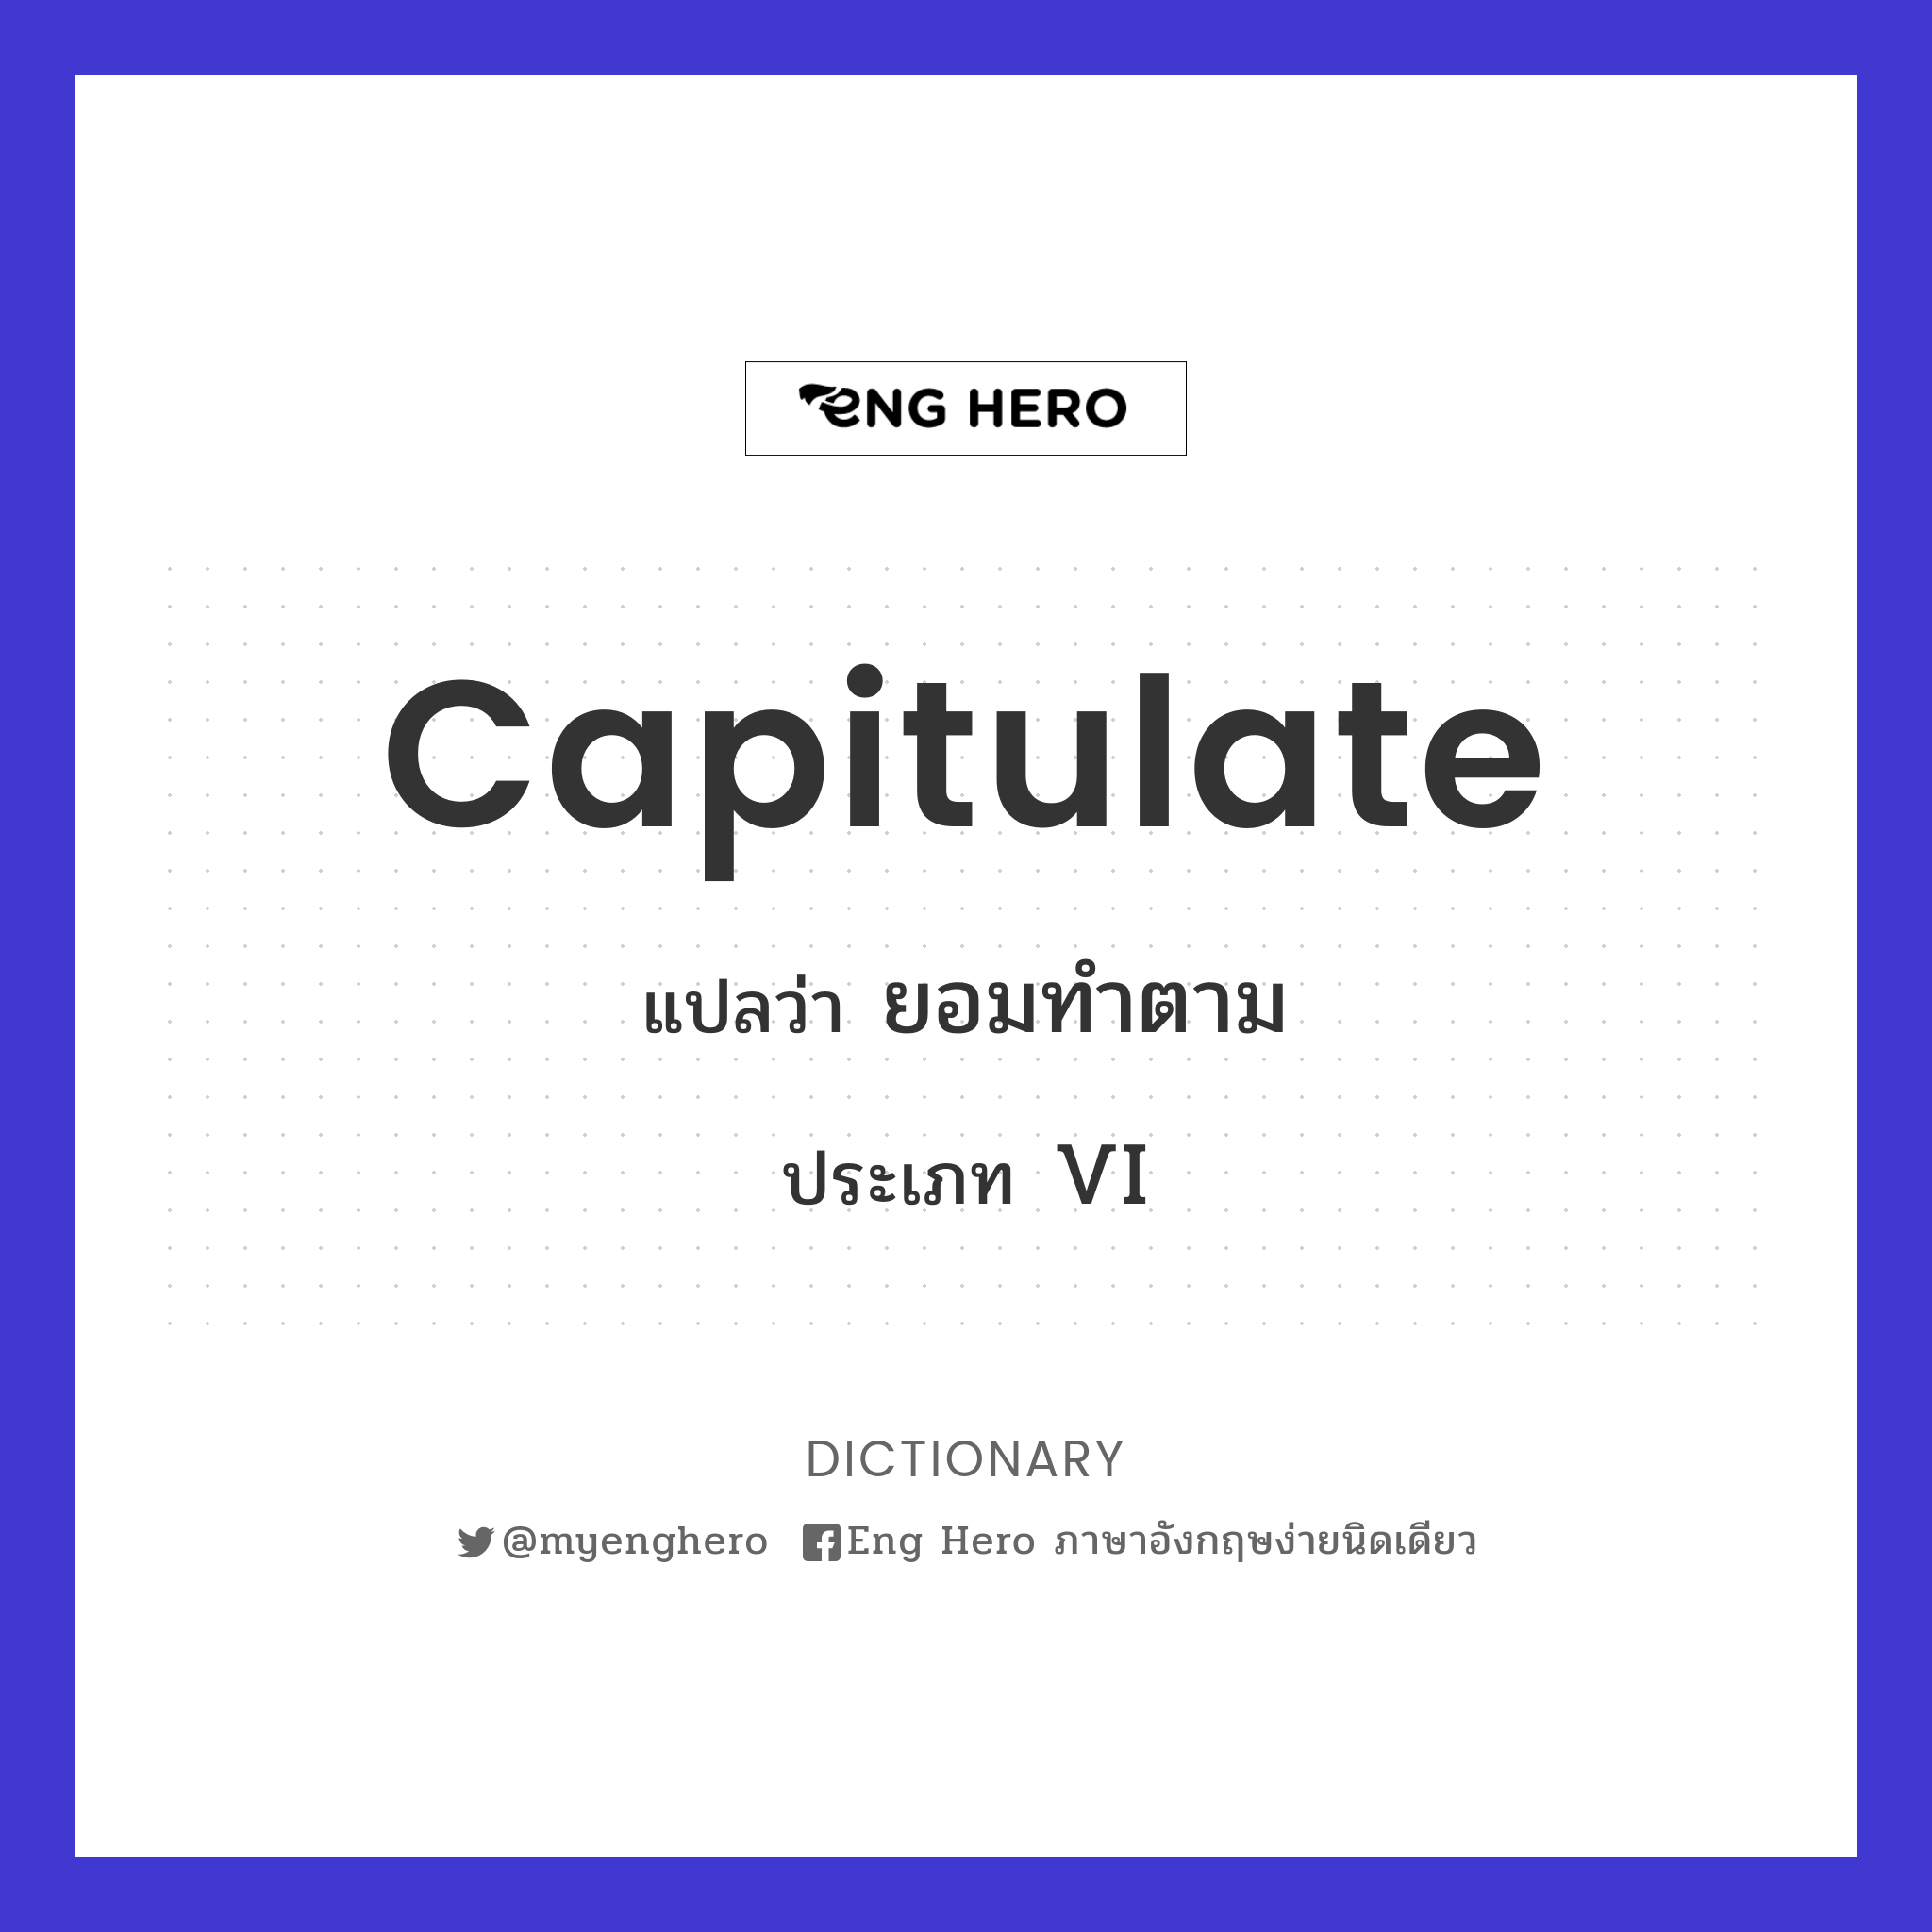 capitulate